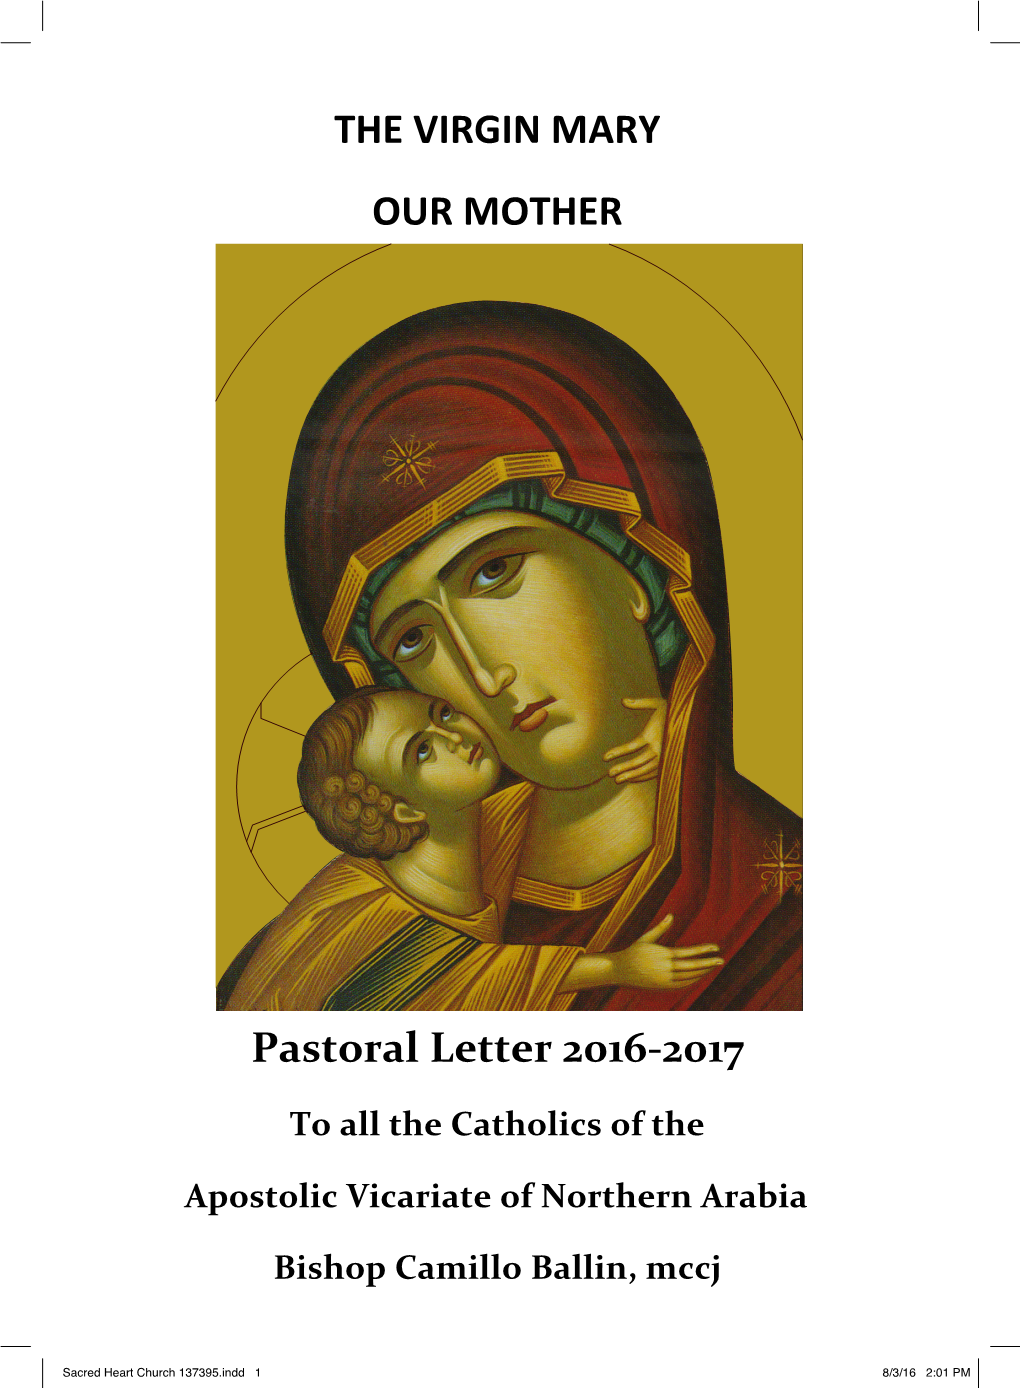 Pastoral Letter: the VIRGIN MARY OUR MOTHER